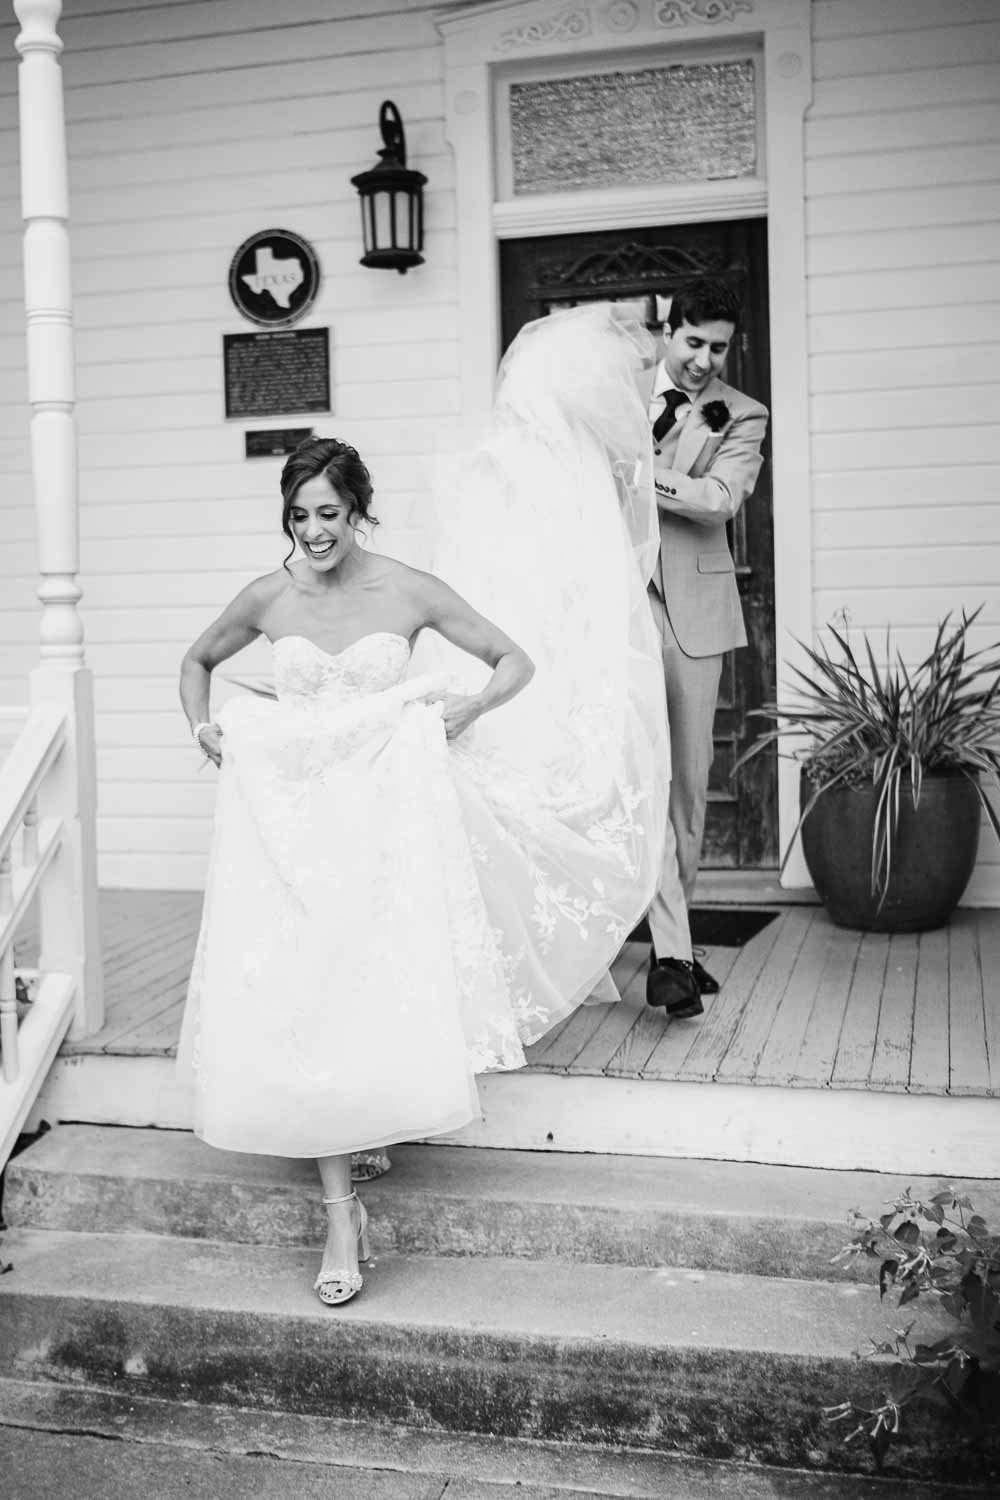 A groom holds the brides dress as they make their way to the wedding reception at Barr Mansion in Austin Texas